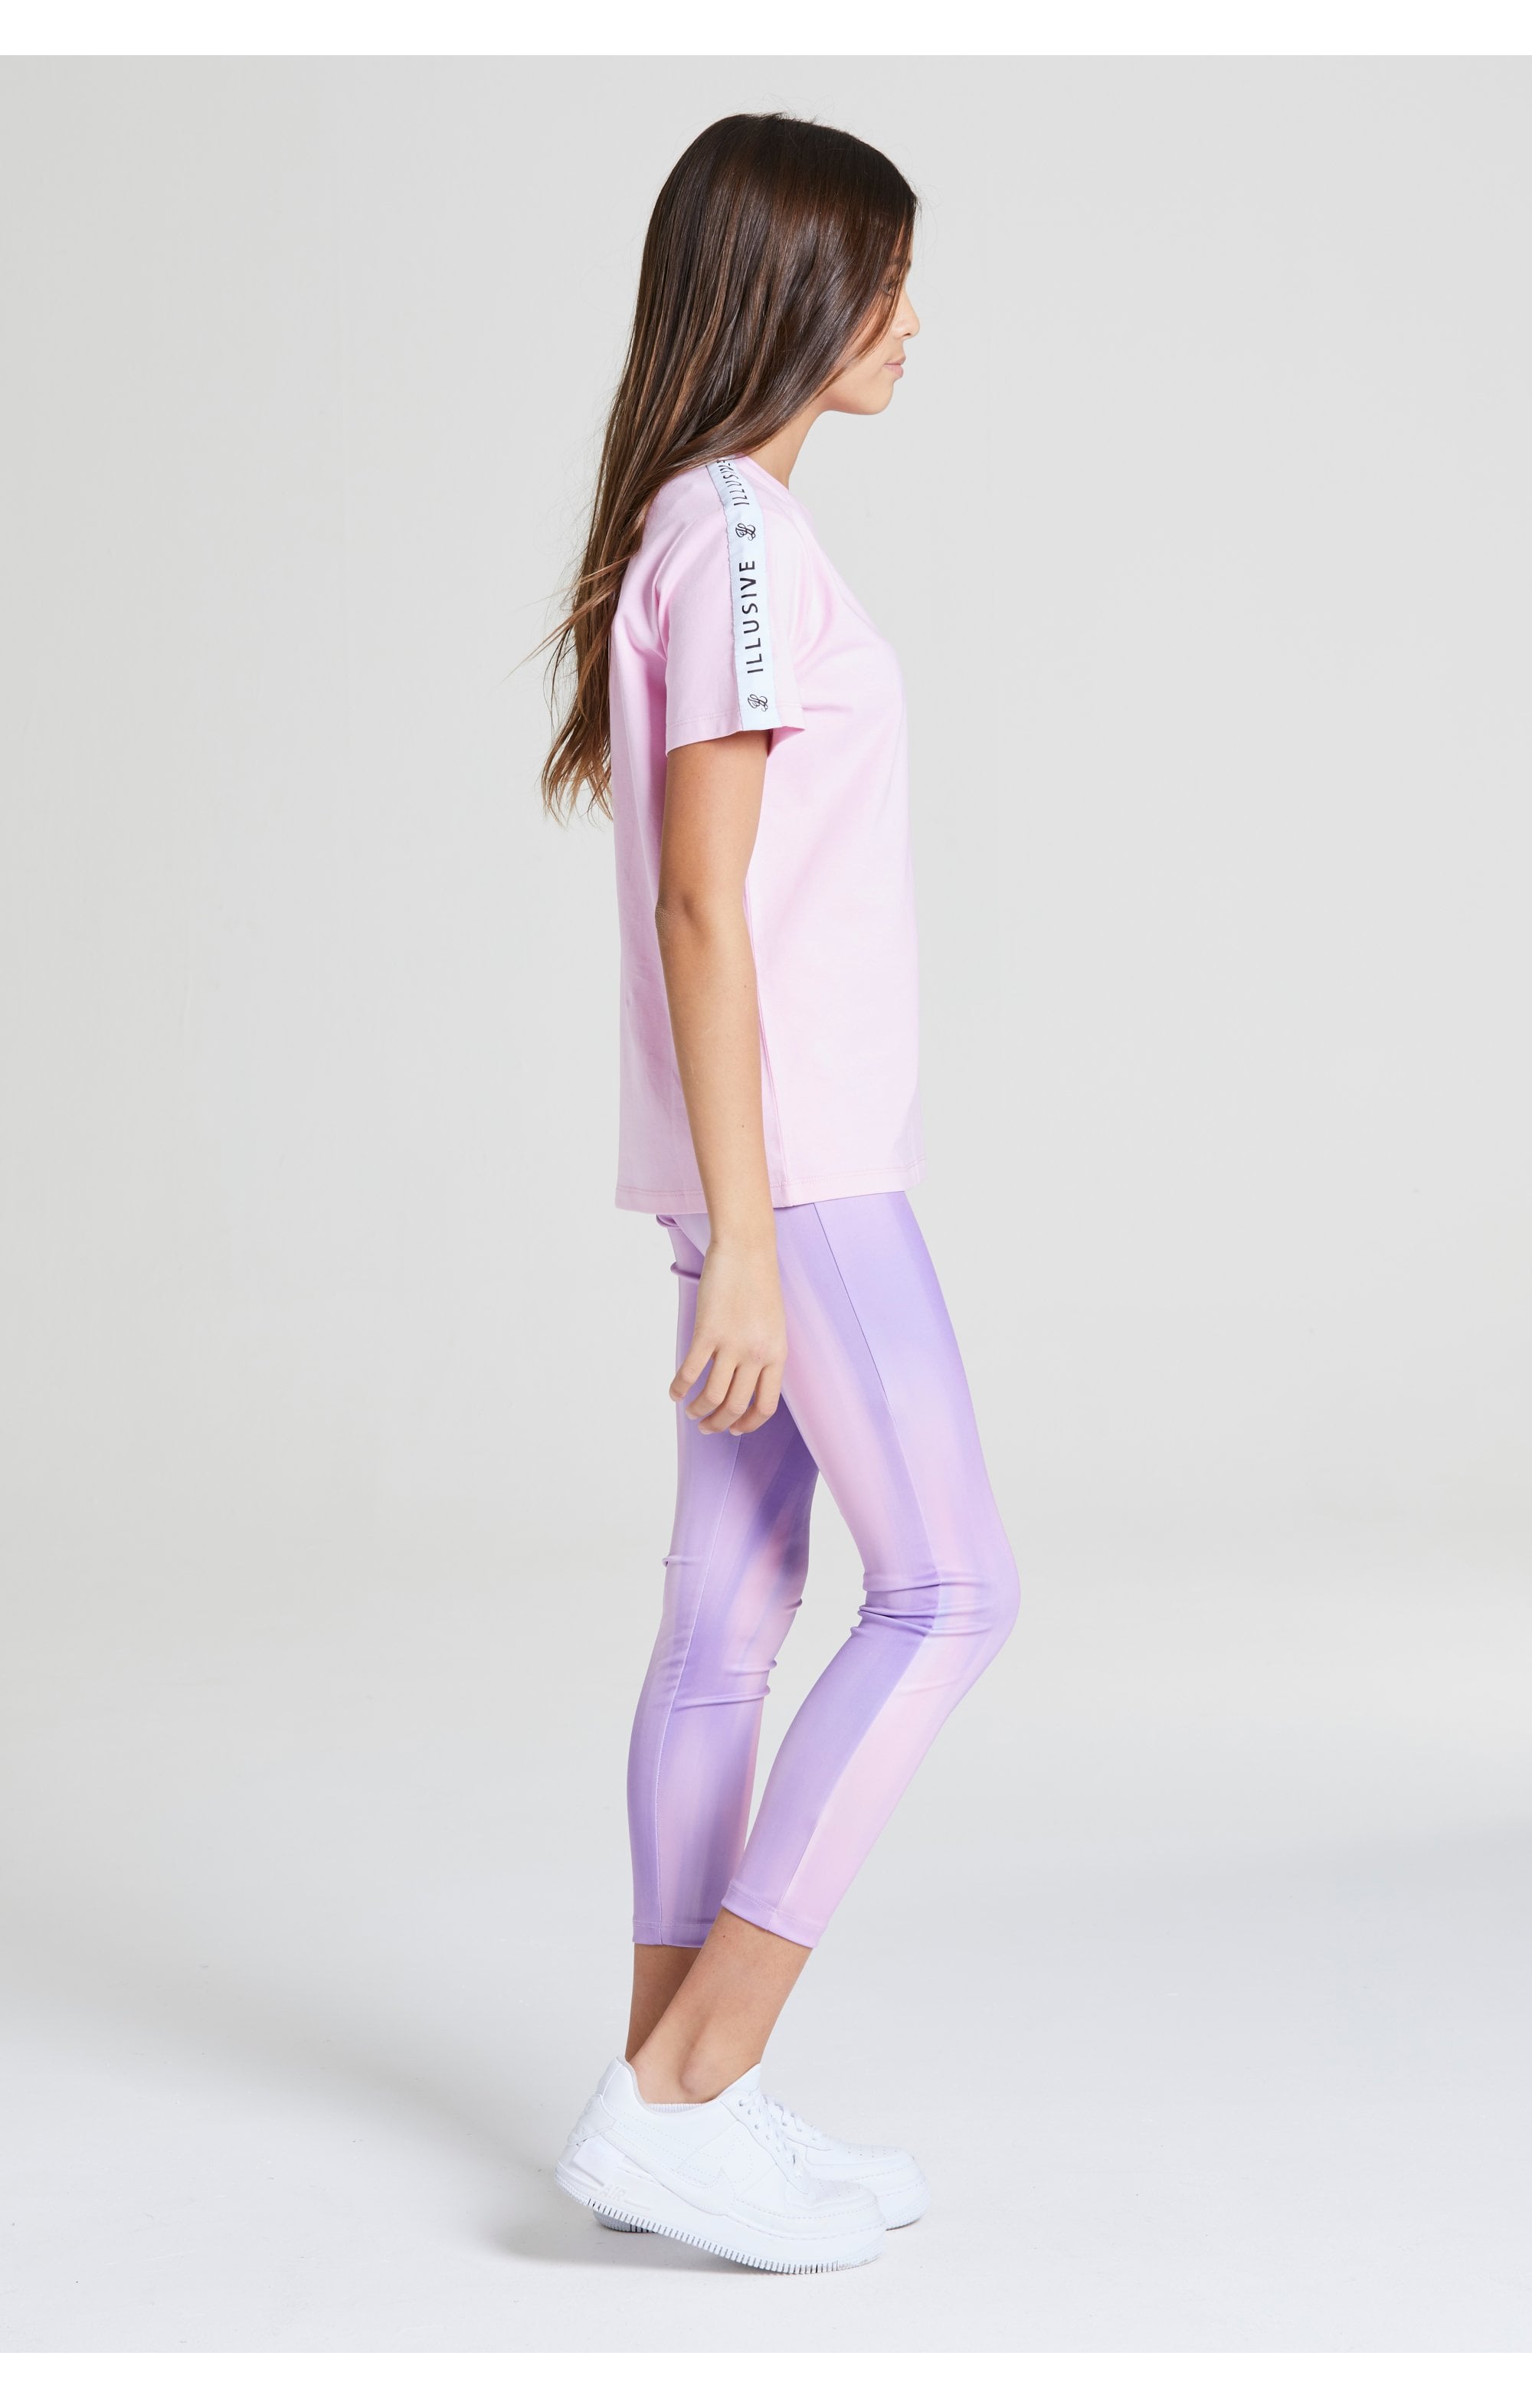 Illusive London BF Fit Taped Tee - Pink (5)